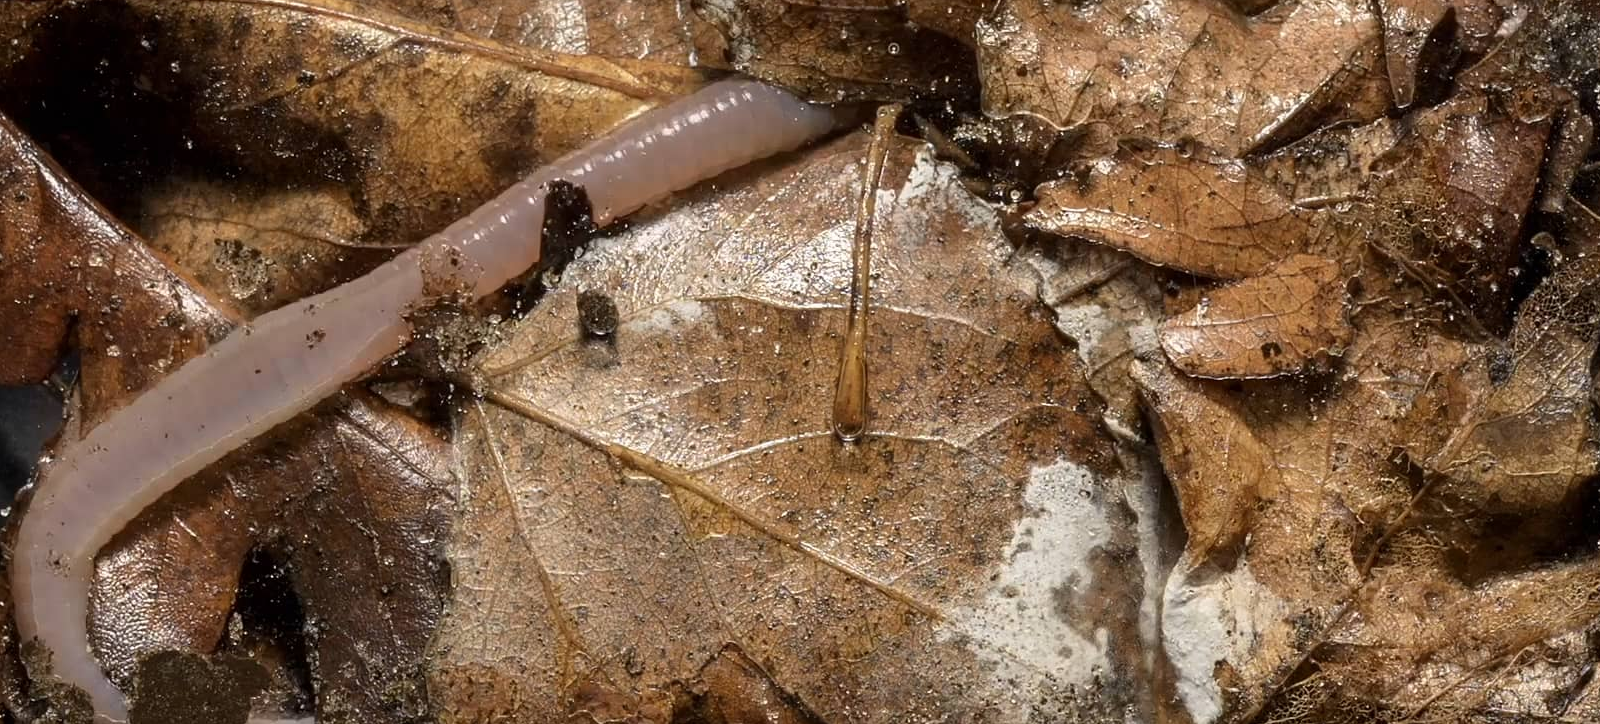 Videos showing the behaviour of three different earthworm species.